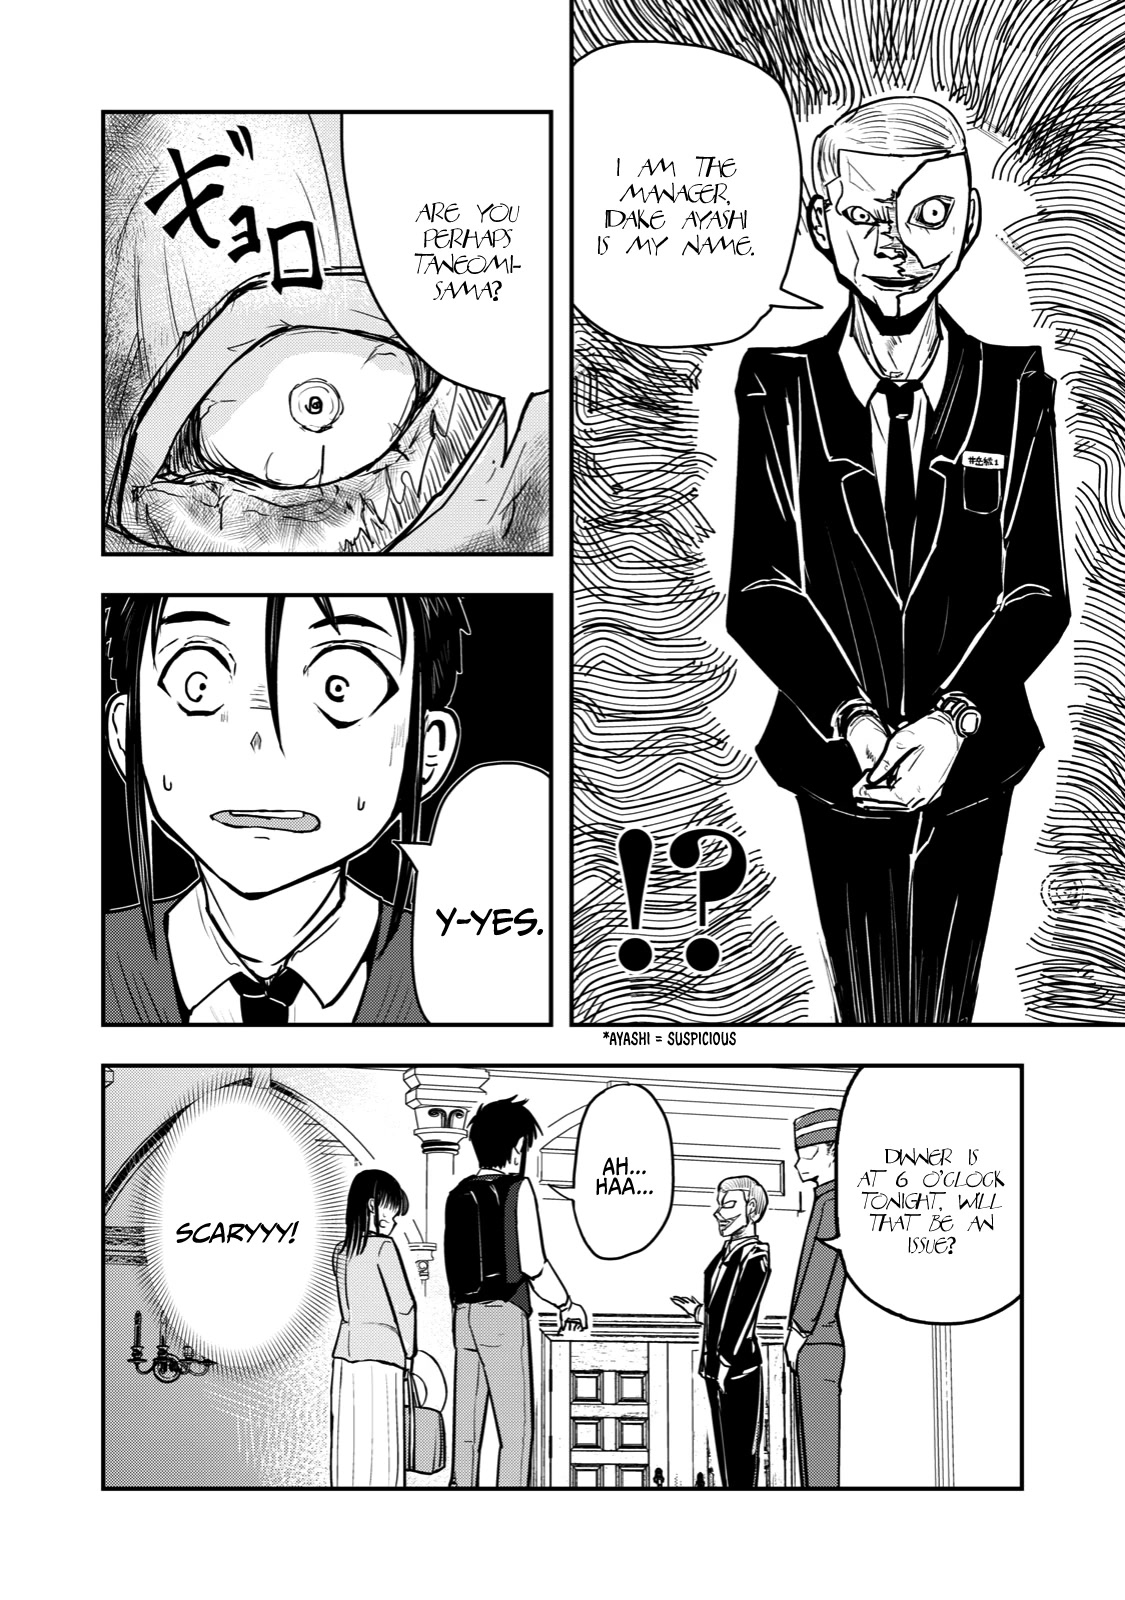 A Manga About The Kind Of Pe Teacher Who Dies At The Start Of A School Horror Movie - Page 2